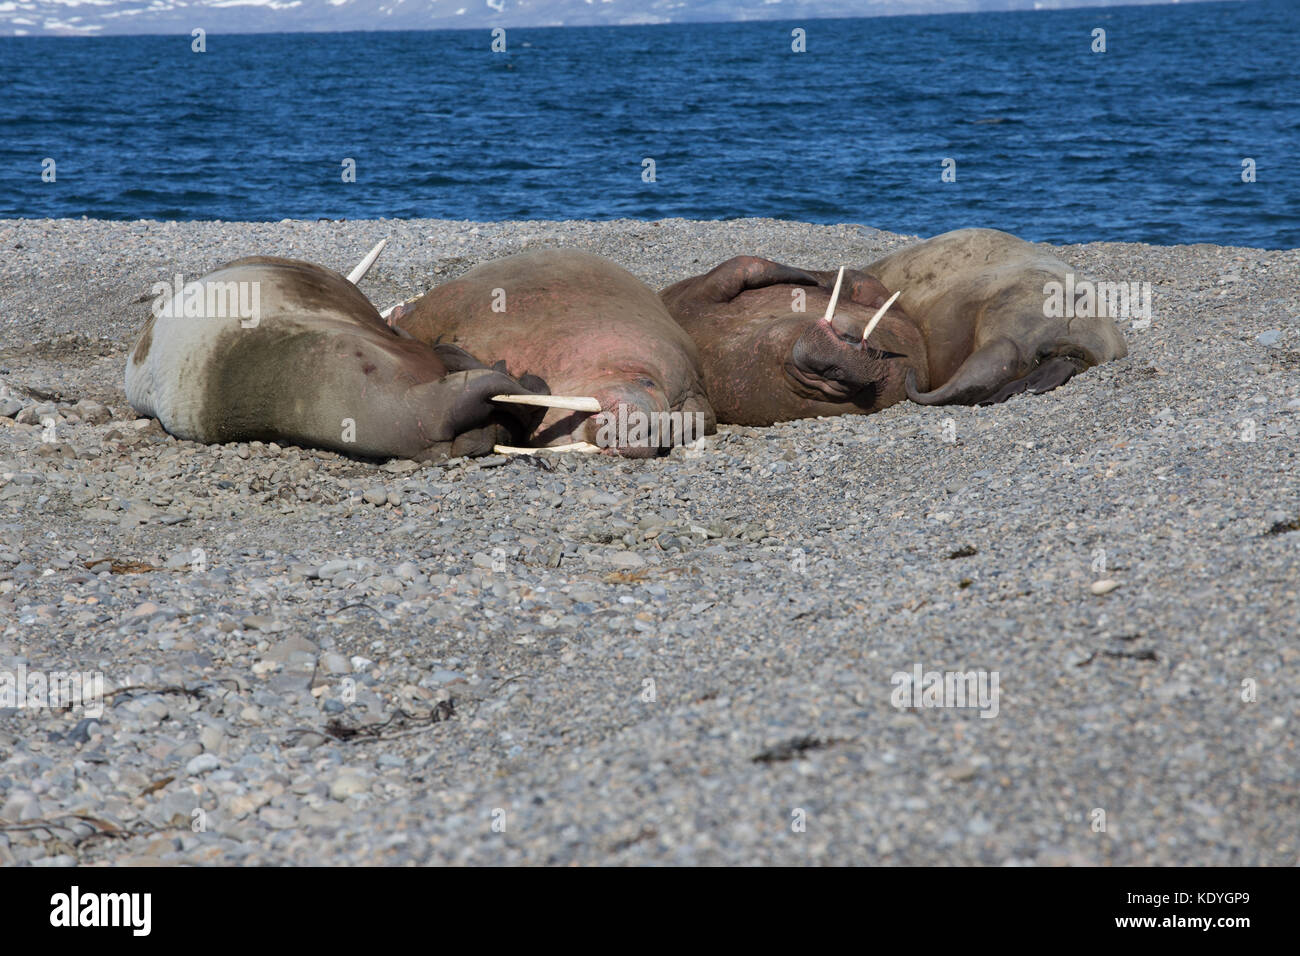 Four male walruses 'hauled-out' on the beach in Spitsbergen, Svalbard. Stock Photo